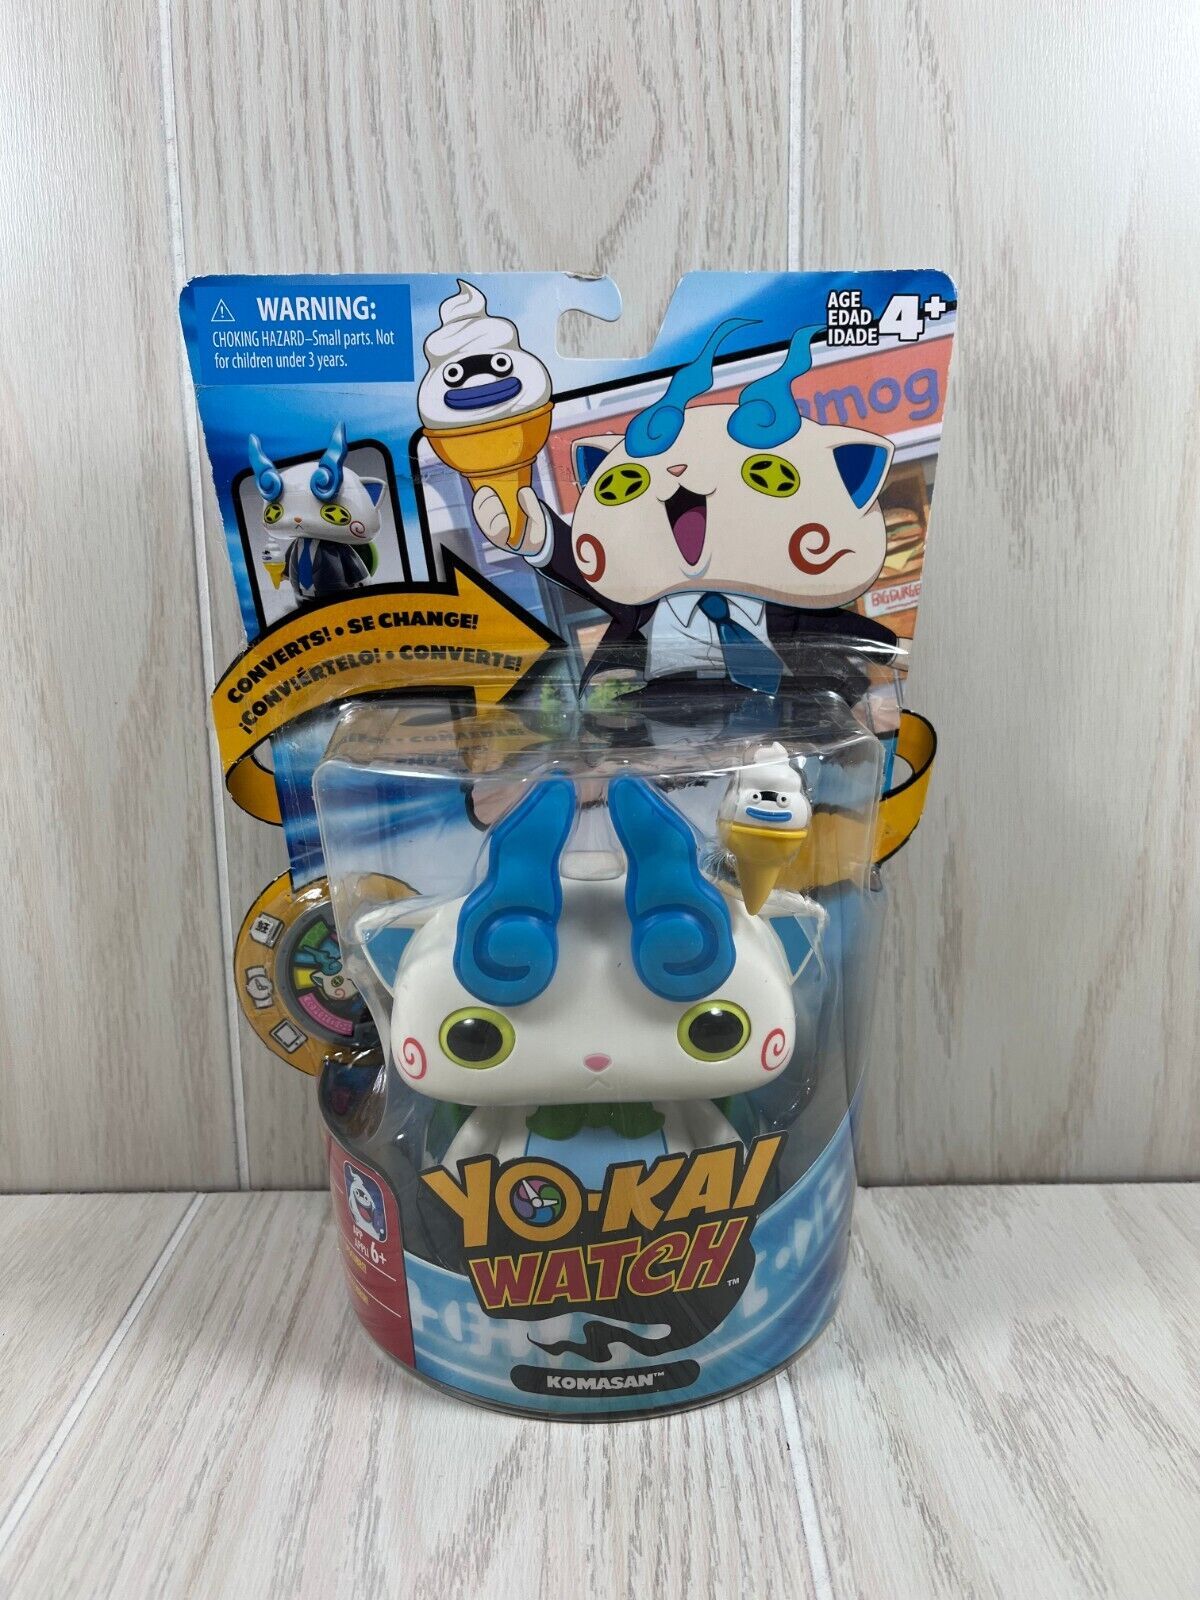 Primary image for Yo-Kai Watch Komasan Medal Moments converts converting figure in package Hasbro